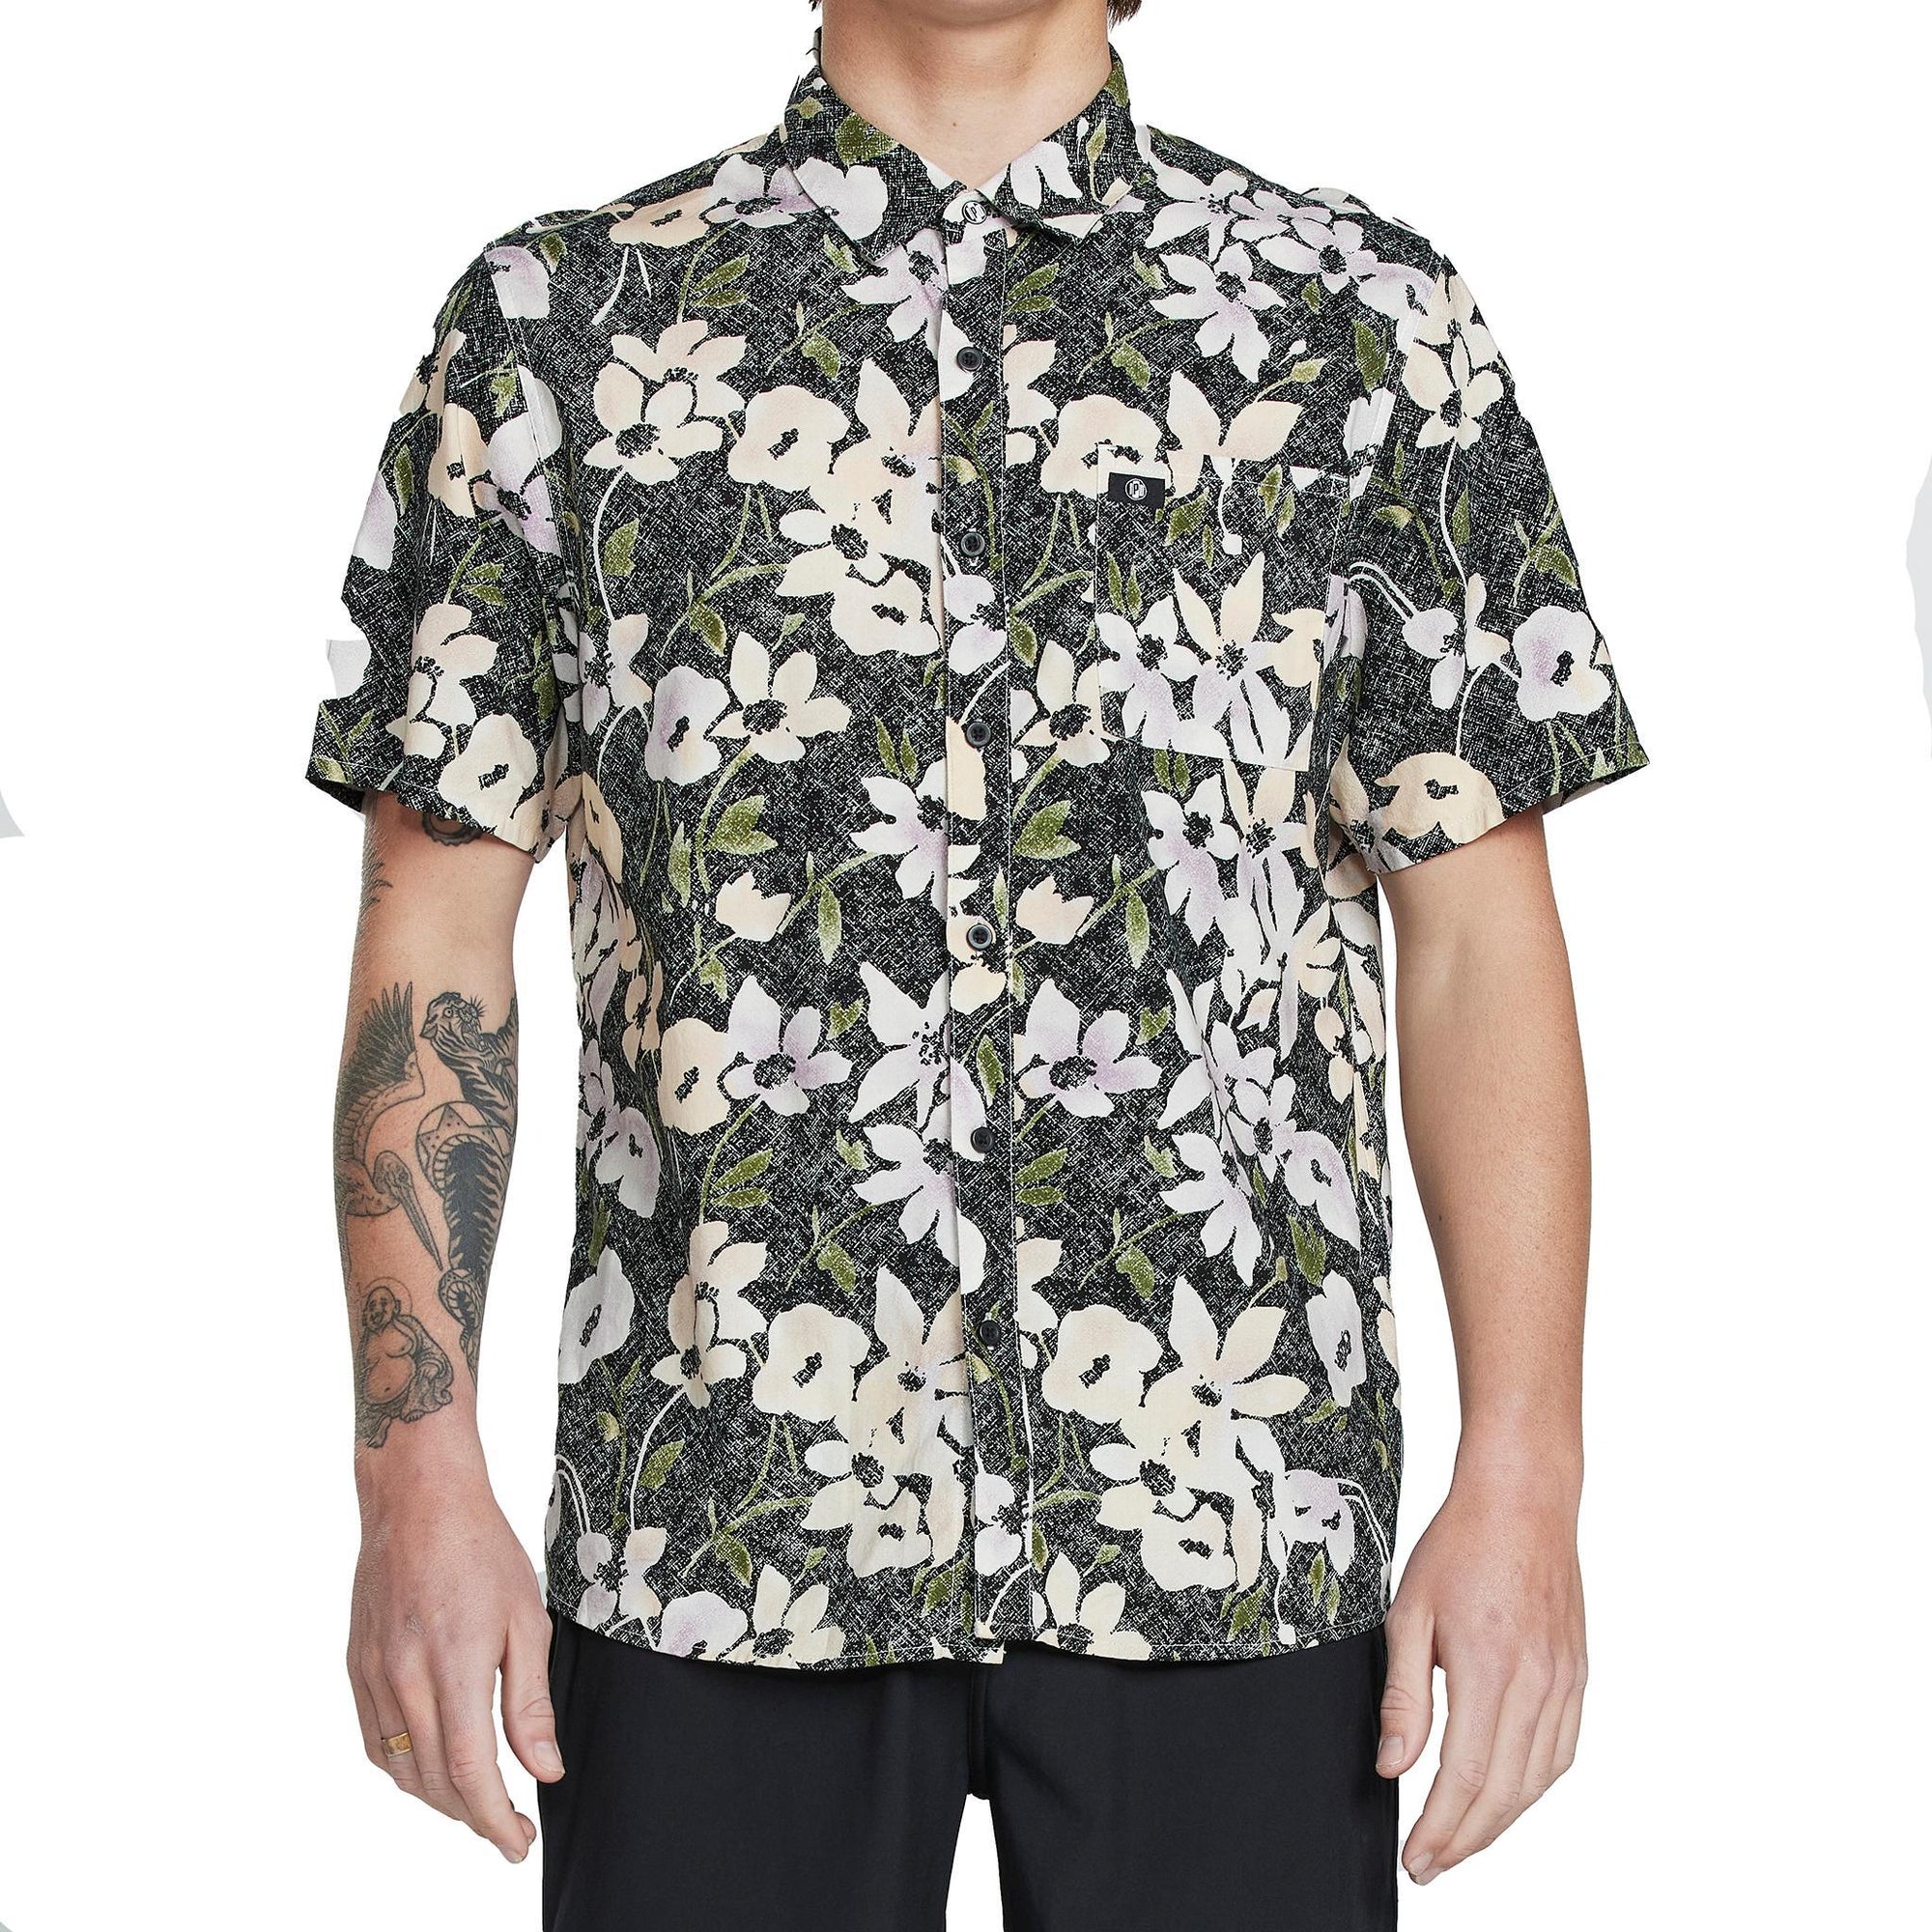 Front view of a men's short sleeve floral button-down shirt. The shirt features and white and yellow floral pattern against a faded black background. The shirt is neatly buttoned and has a classic collar.